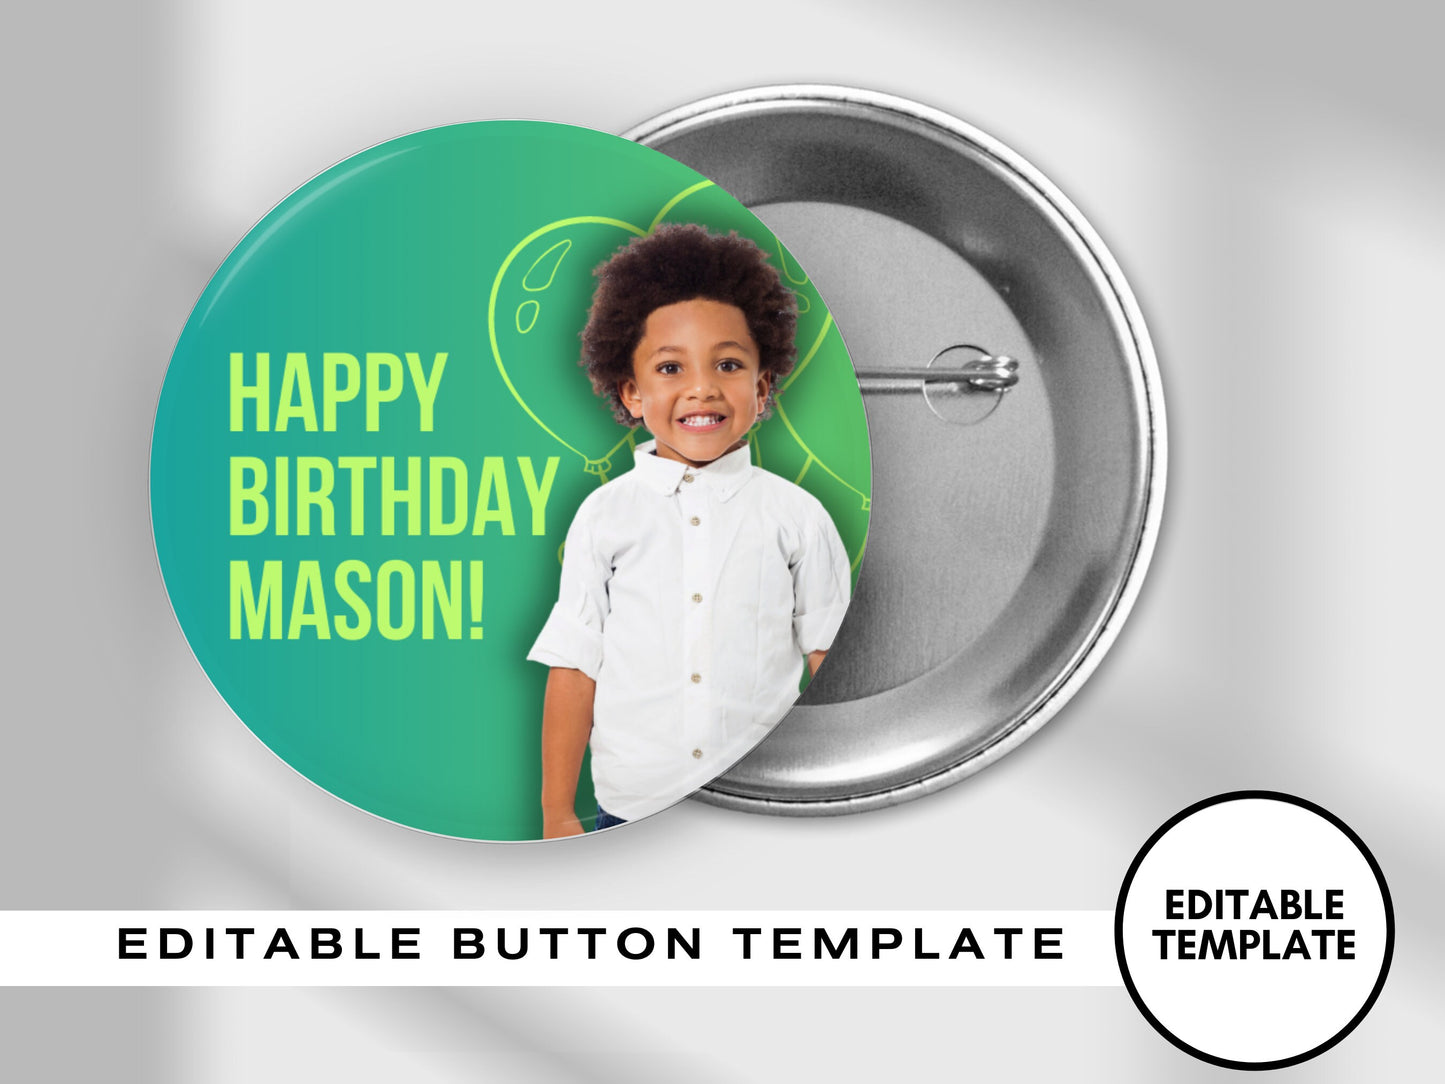 GREEN BIRTHDAY PINBACK Template,Full Color| Personalized Funeral Buttons|Pinback Button Template|Keepsake Pin Backs Template